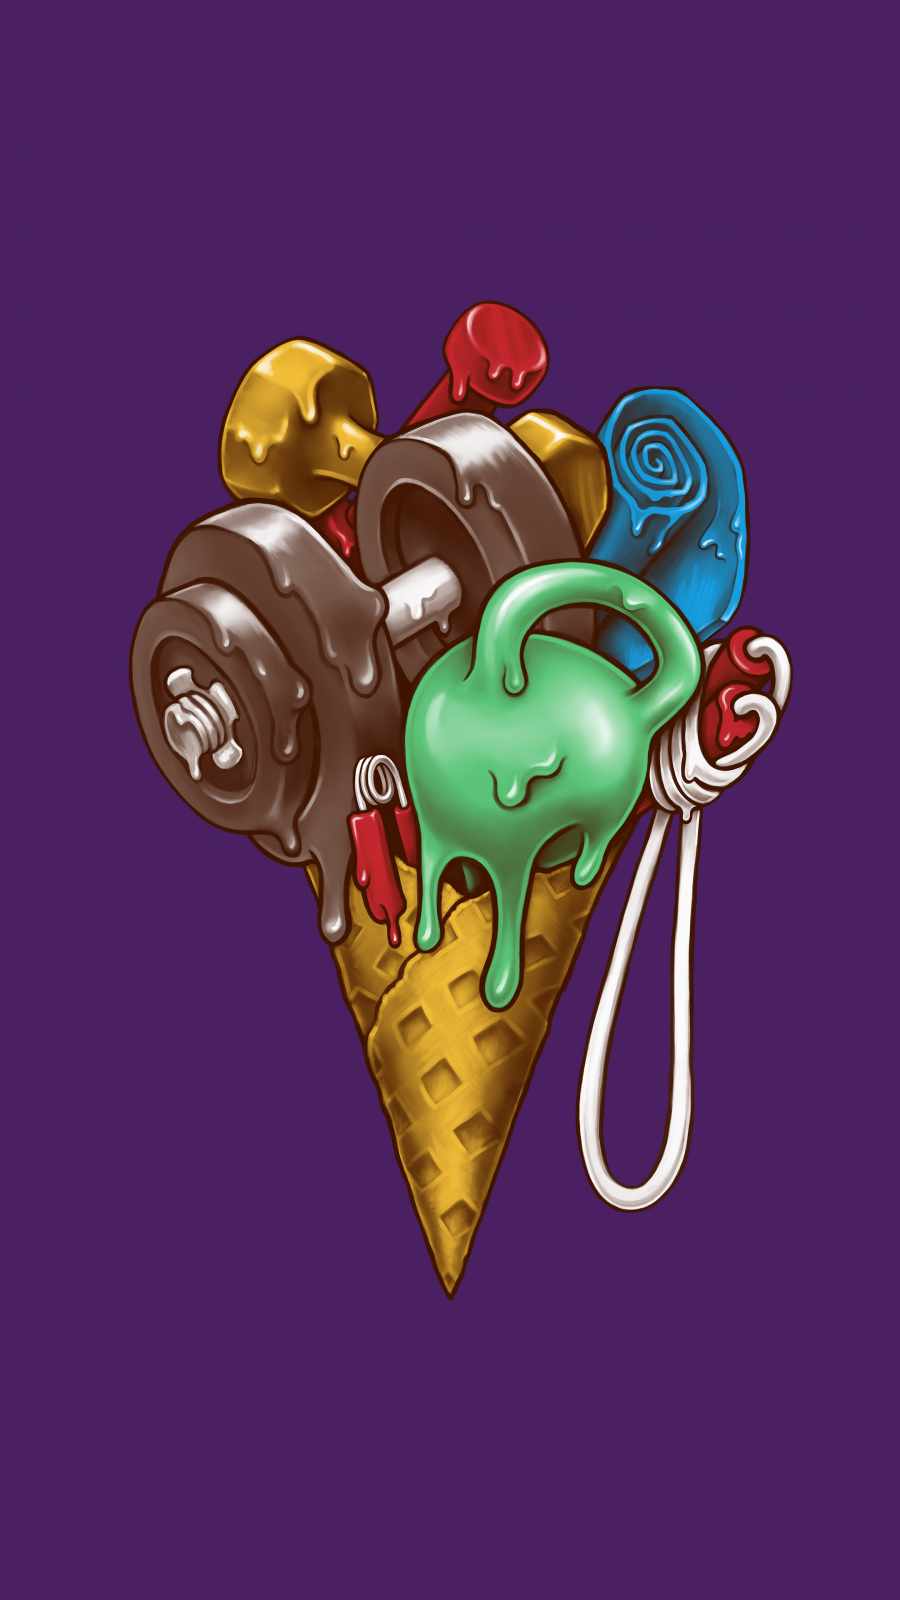 Ice Cream Workout IPhone Wallpaper HD  IPhone Wallpapers